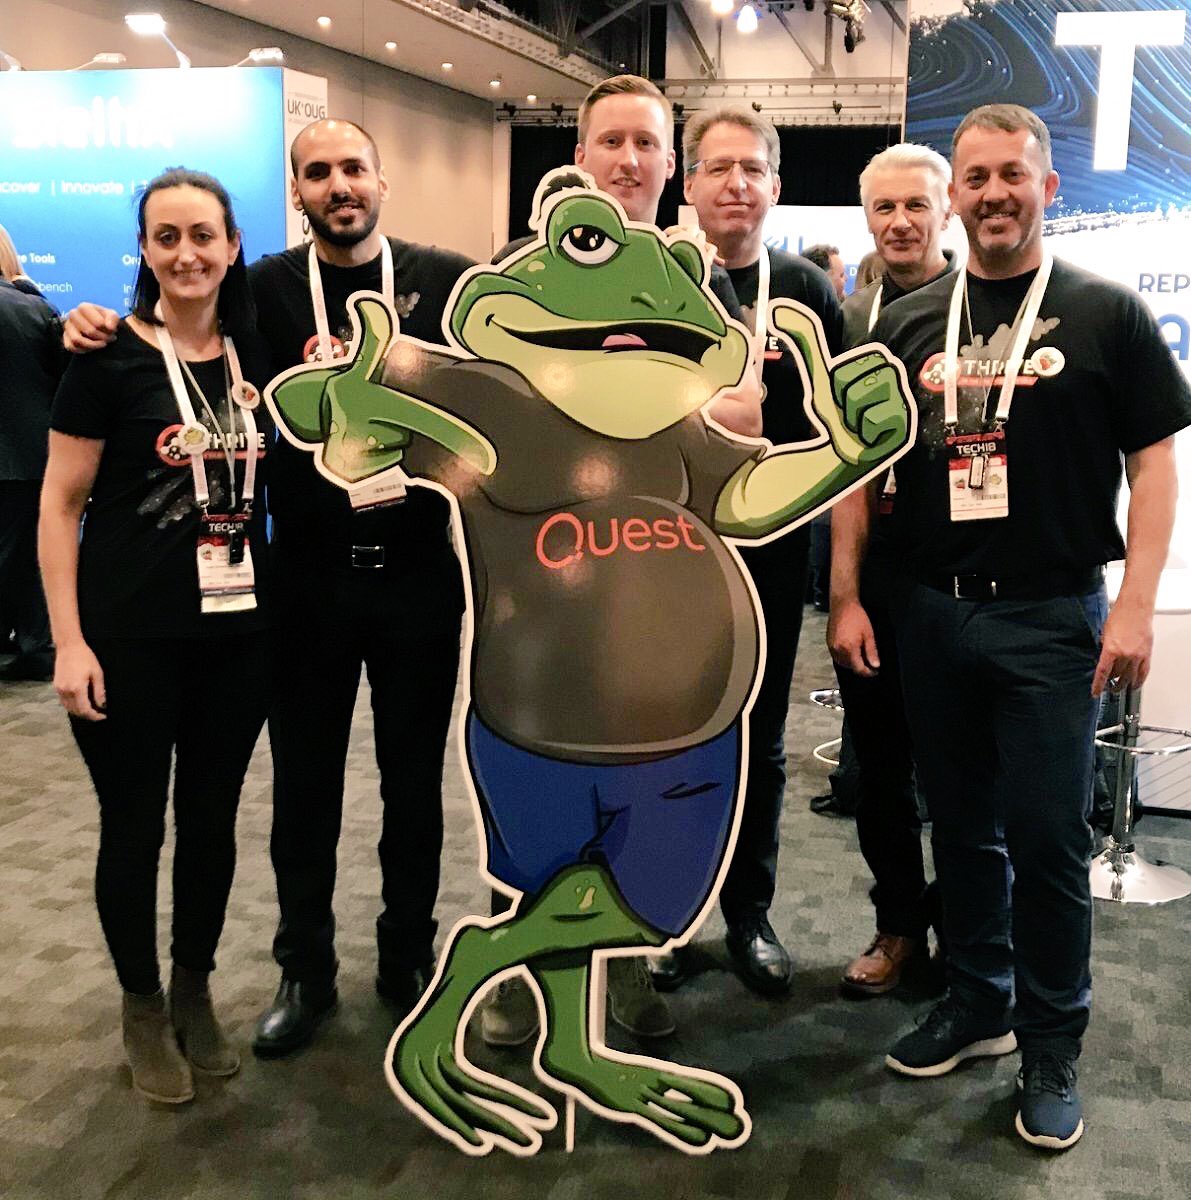 Our fantastic team representing @Quest at #UKOUG_Tech18 in Liverpool! Meet the team at booth #21 and get a selfie with Mr.Toad. #WeAreQuest